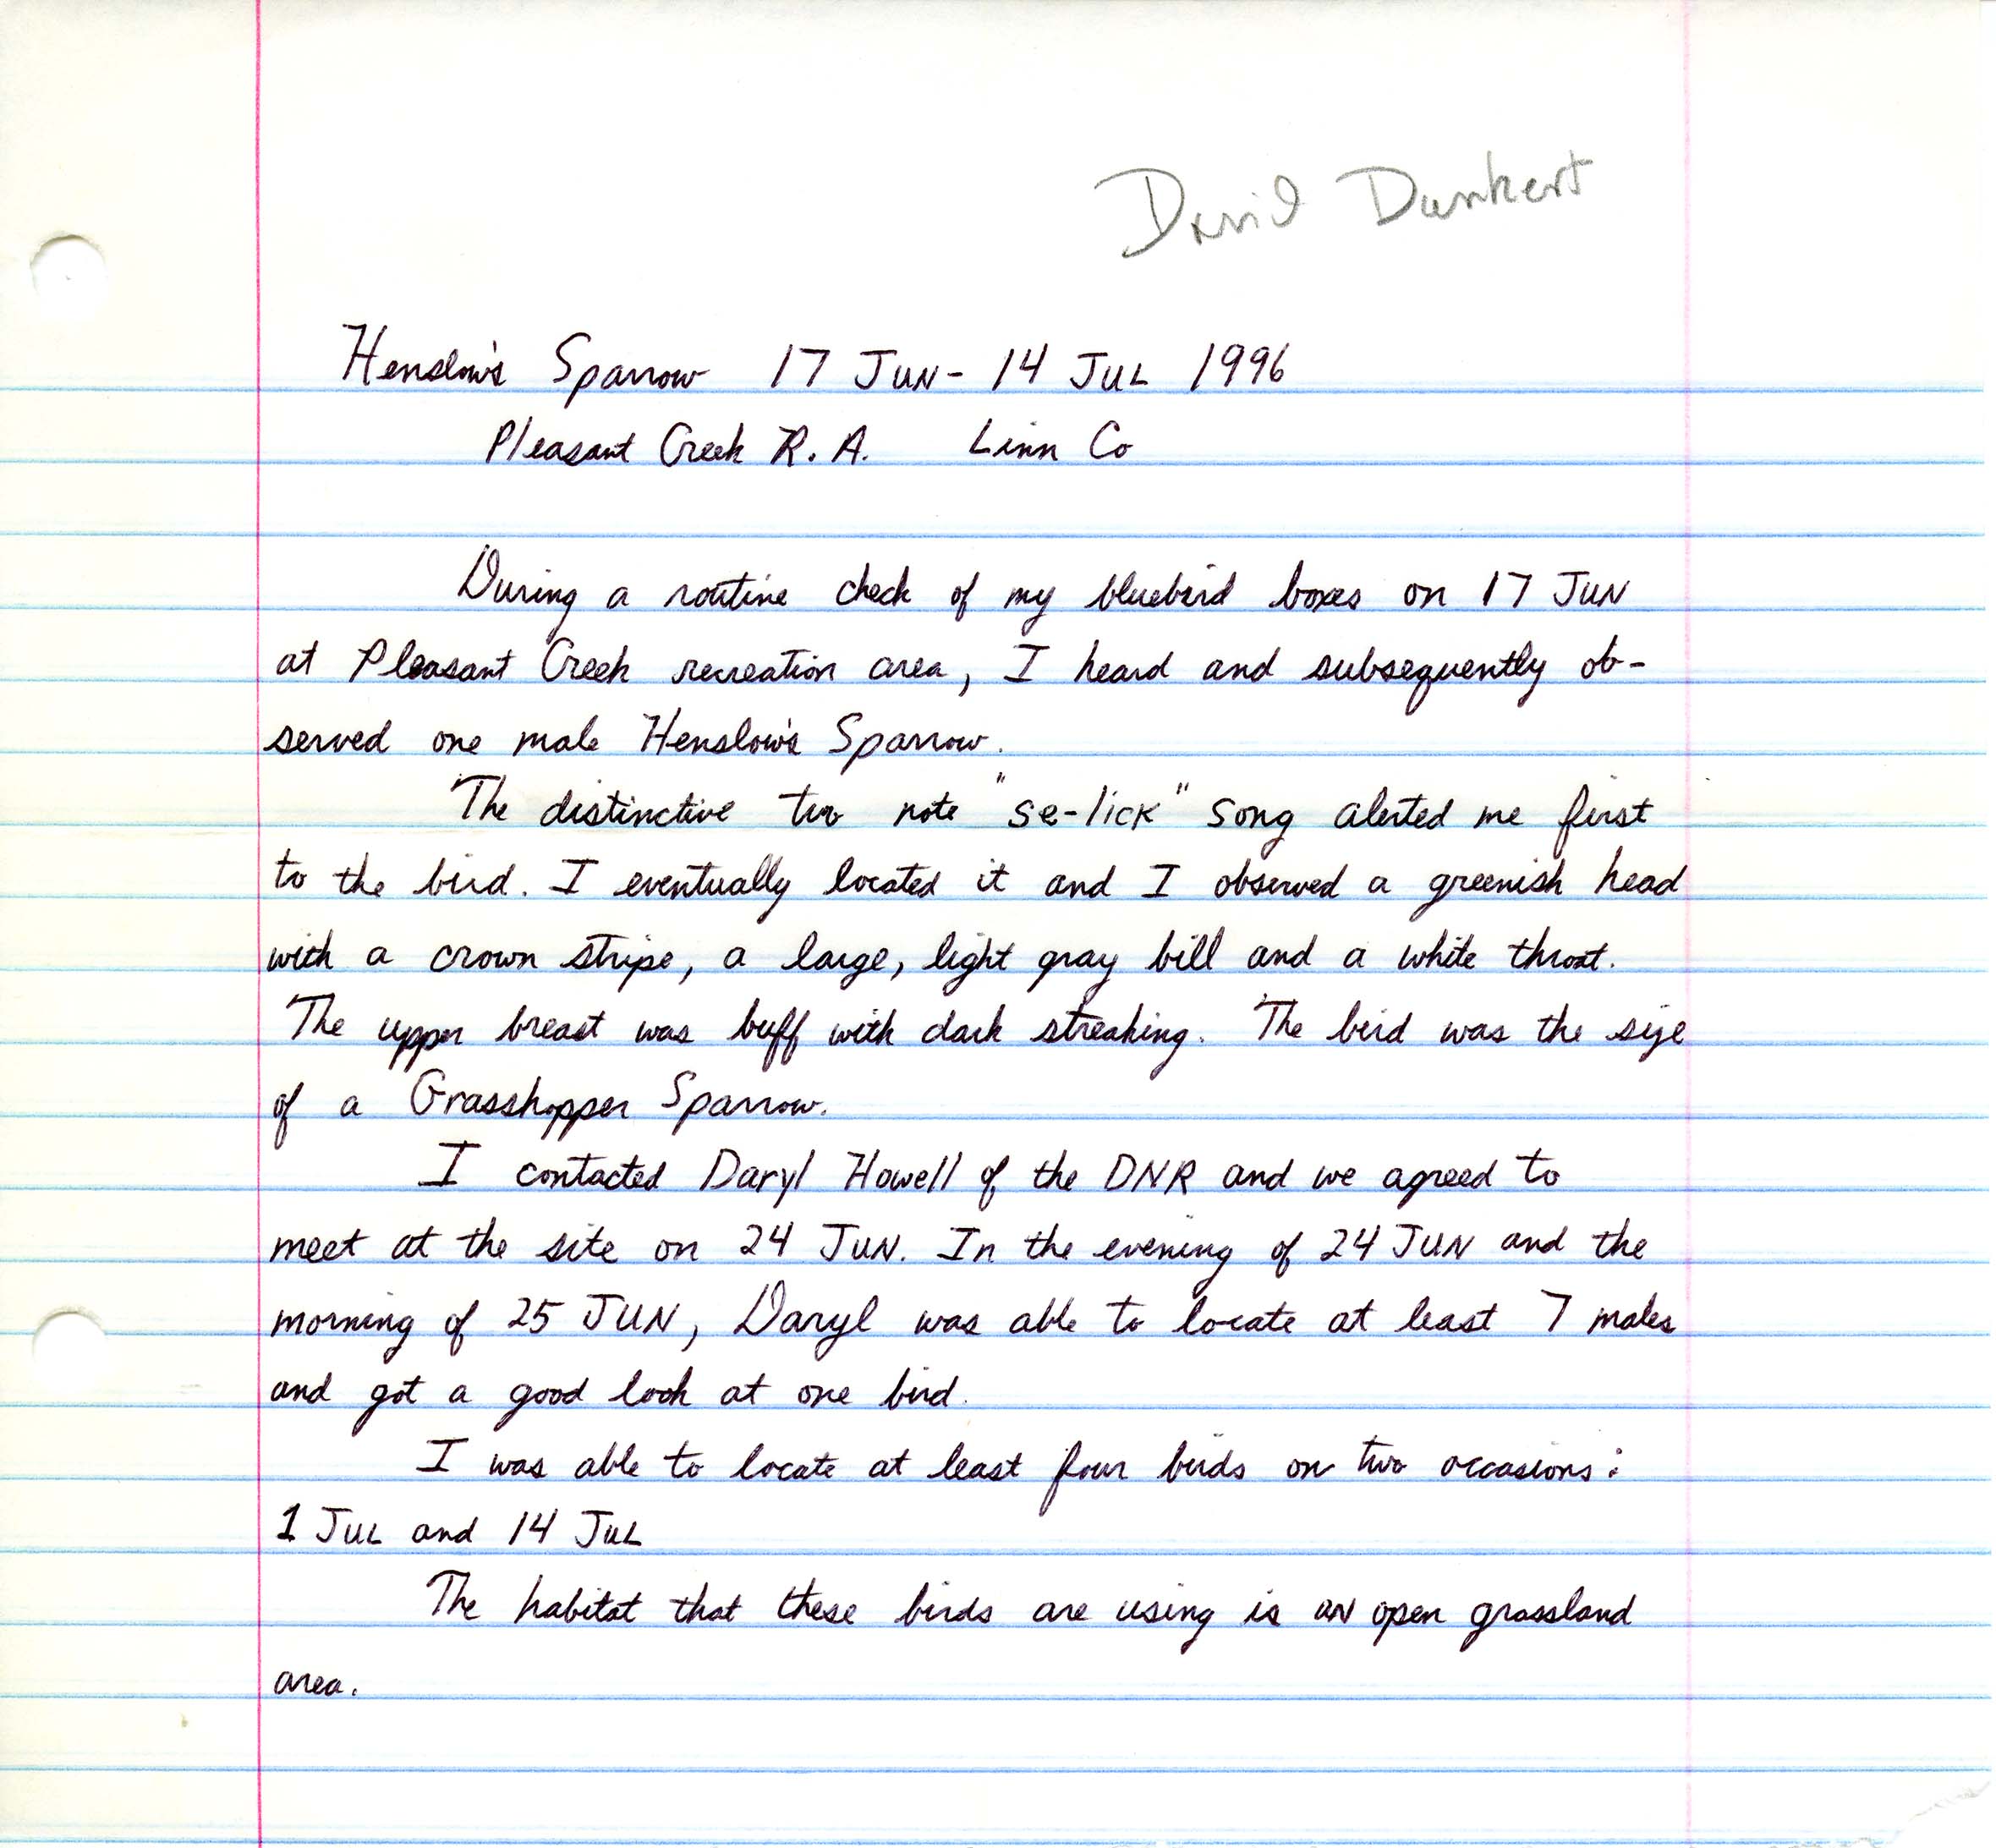 Field notes contributed by David L. Dankert, summer 1996